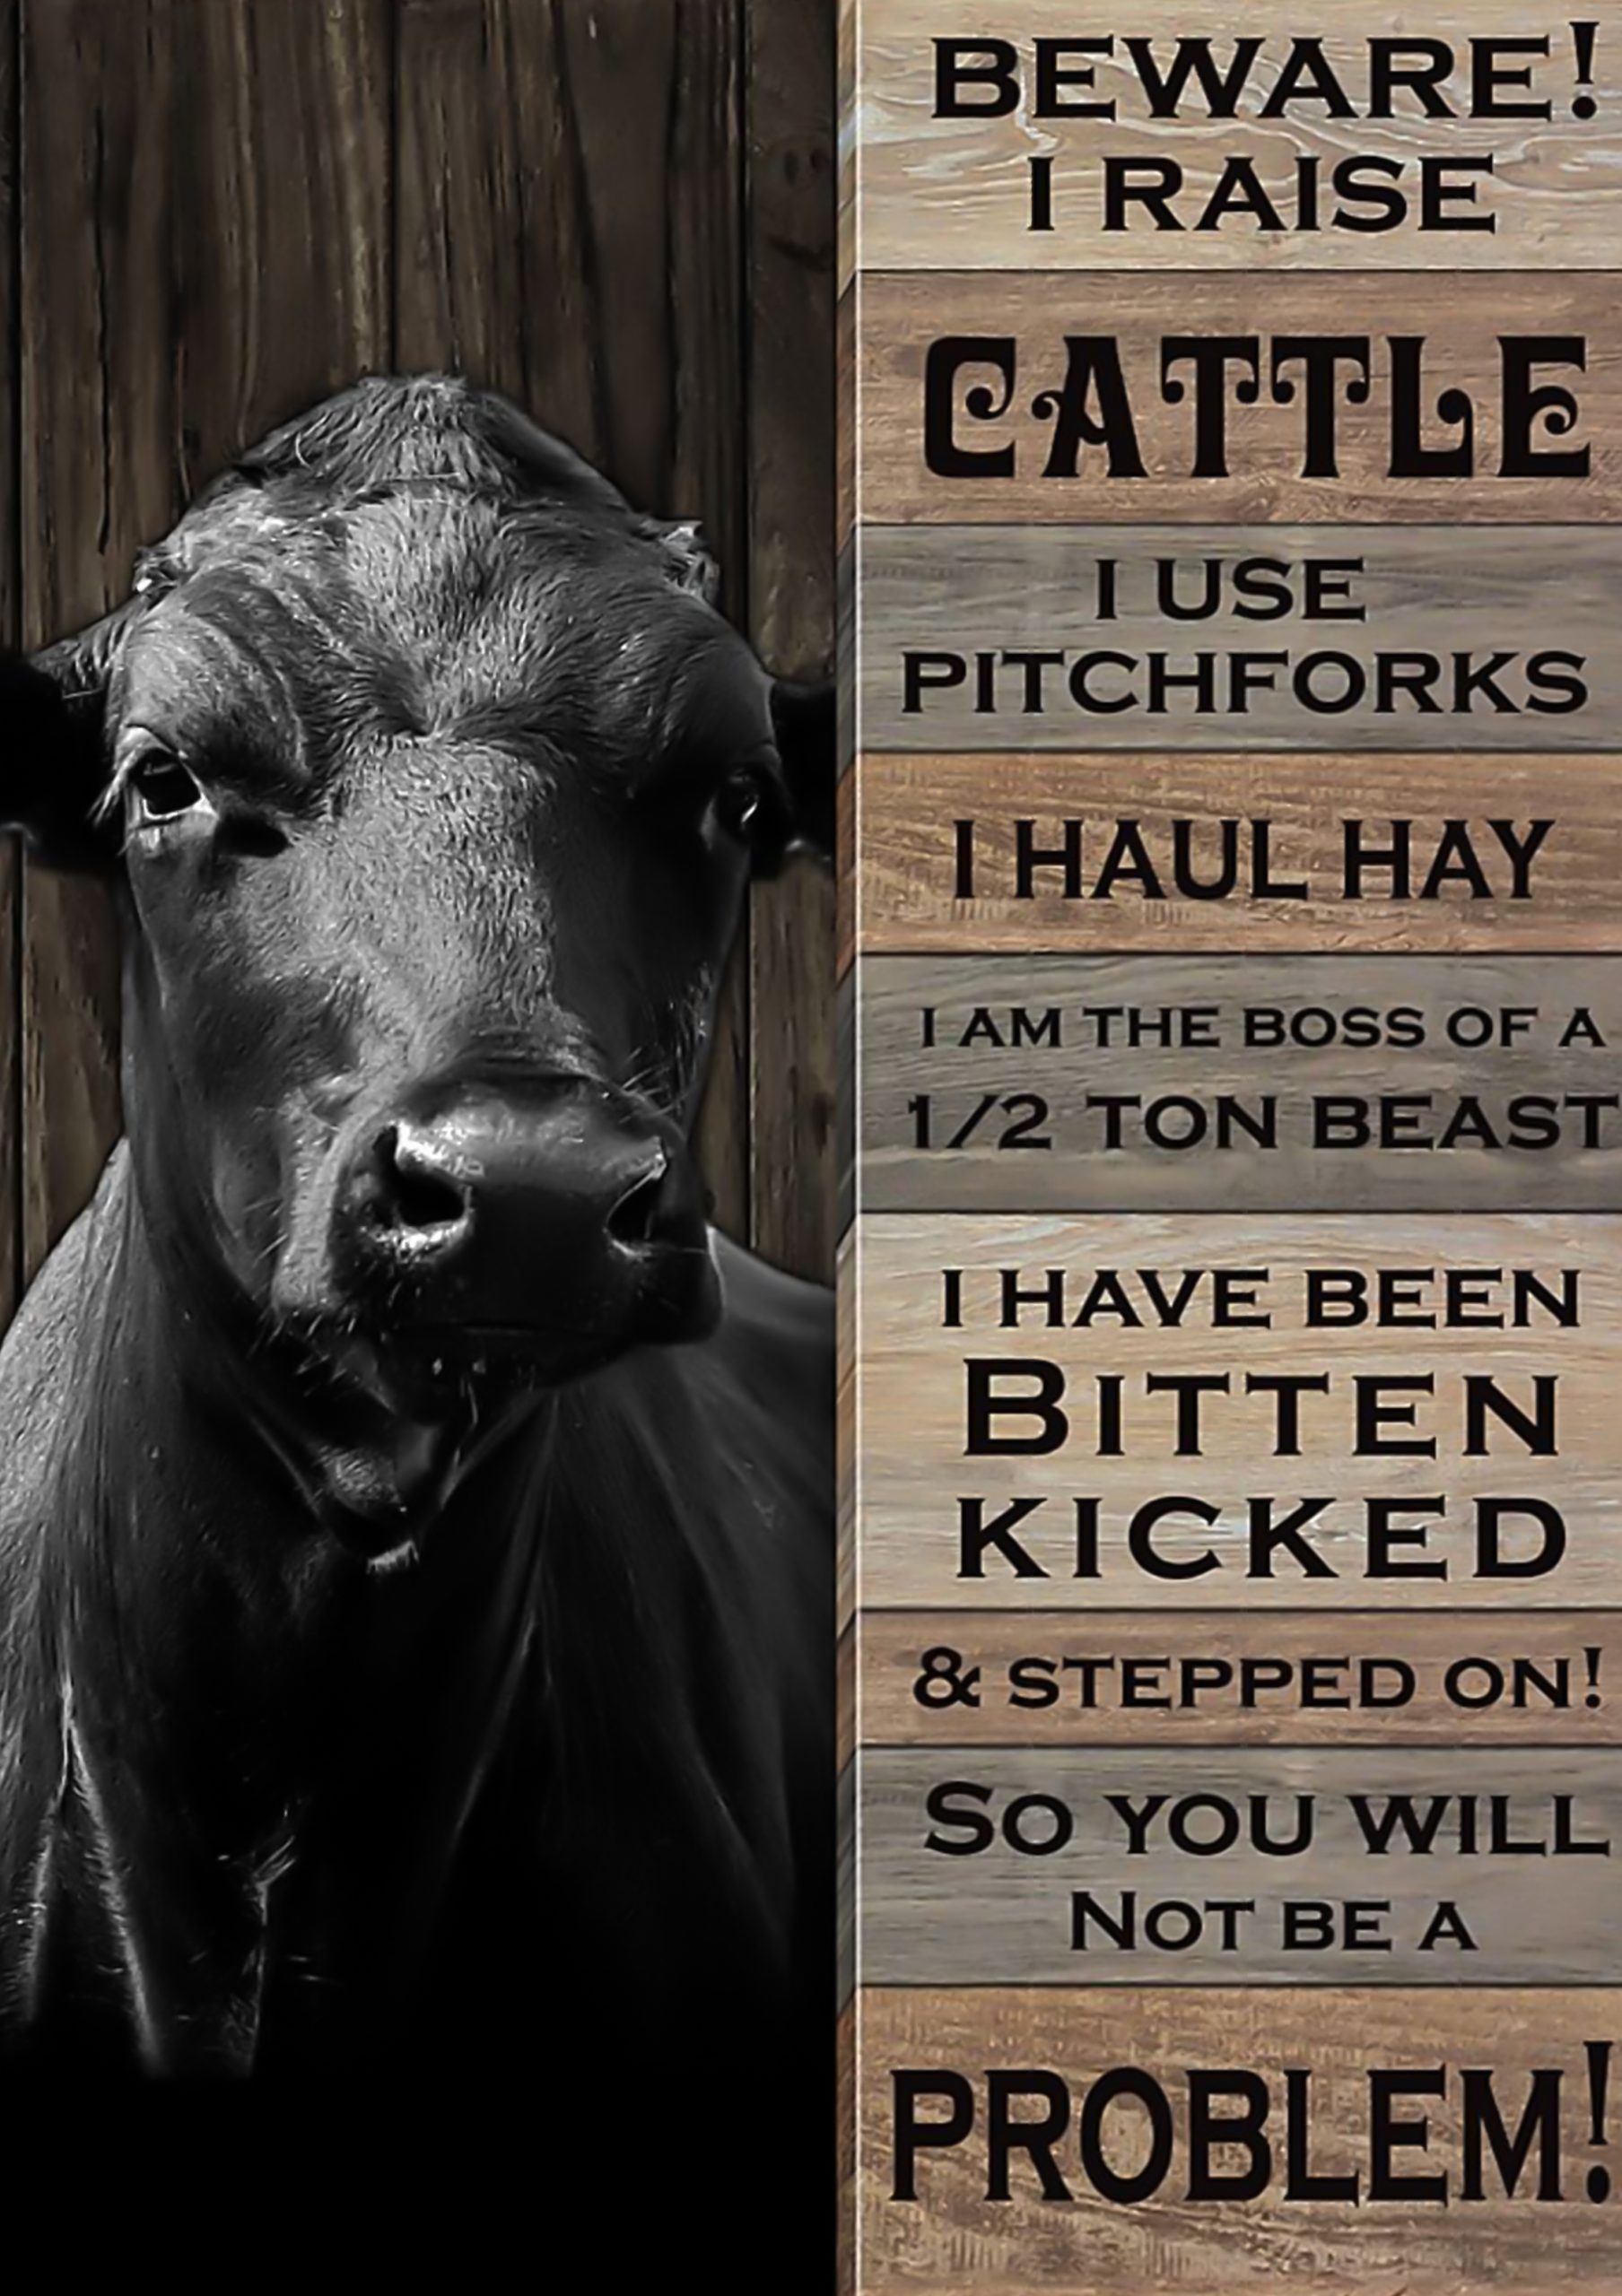 Beware I raise cattle I use pitchforks so you will not be a problem poster